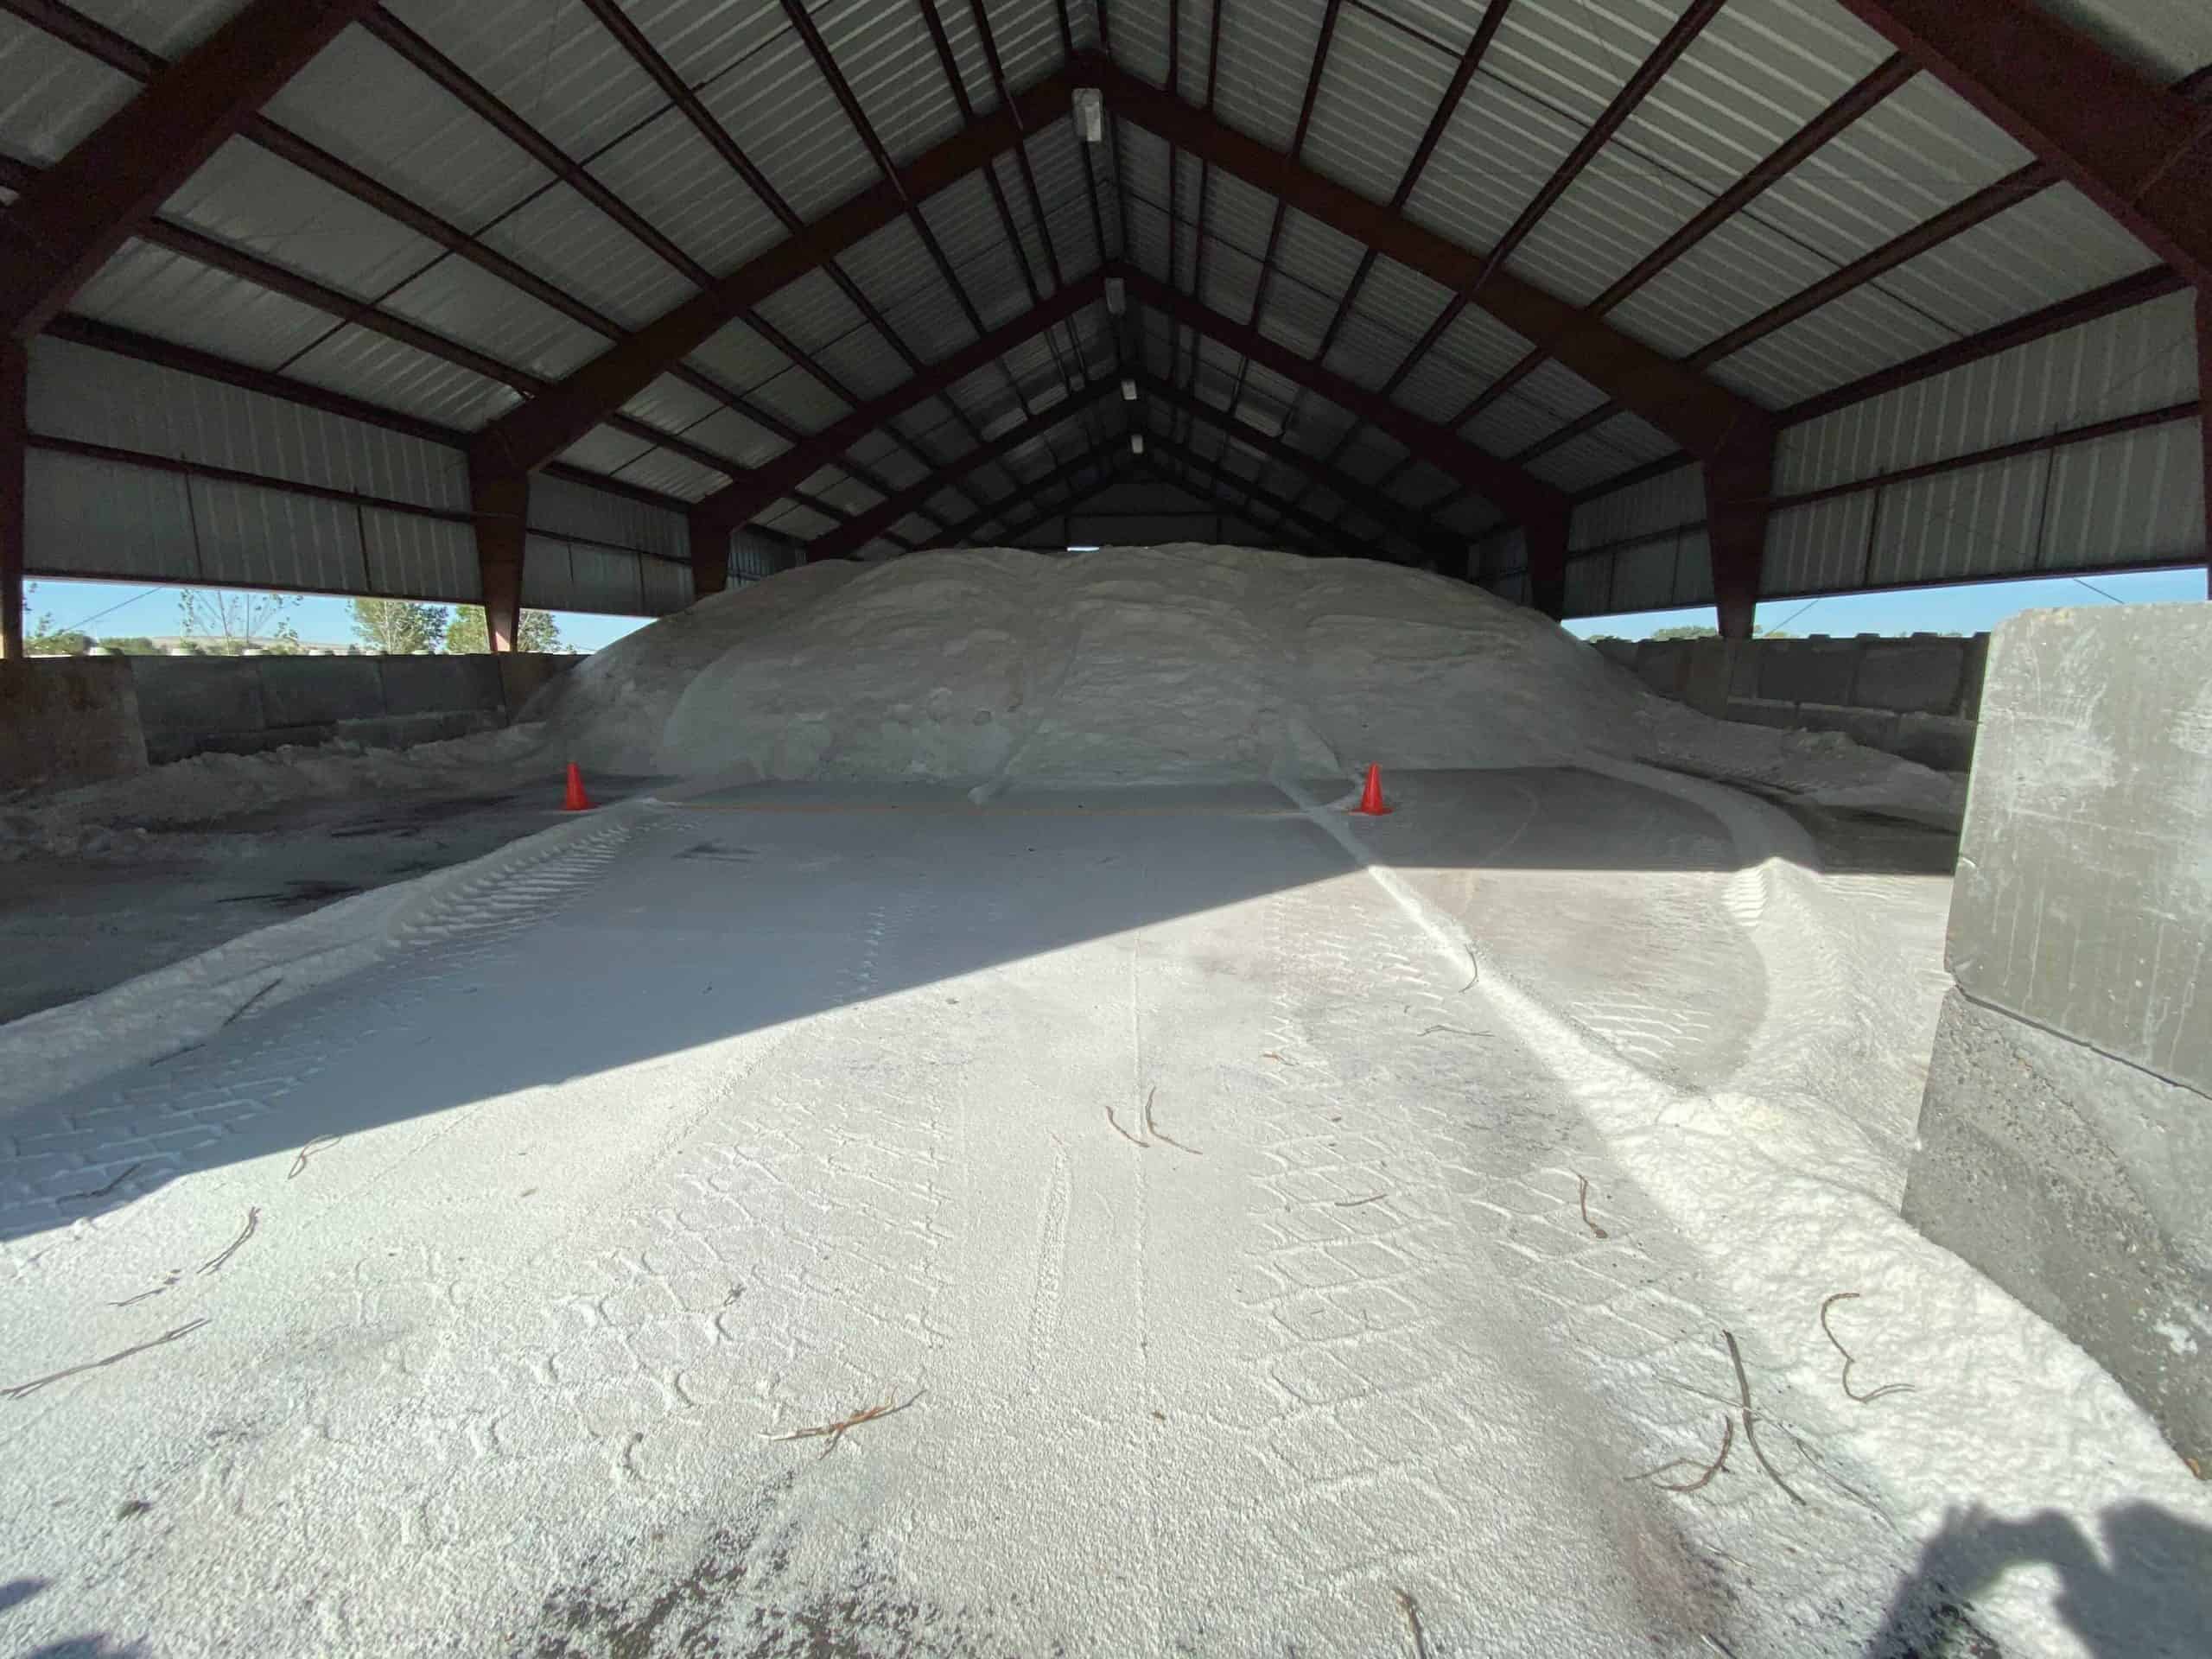 Road Salt Can Hurt as Much as Help | Stockpile Reports